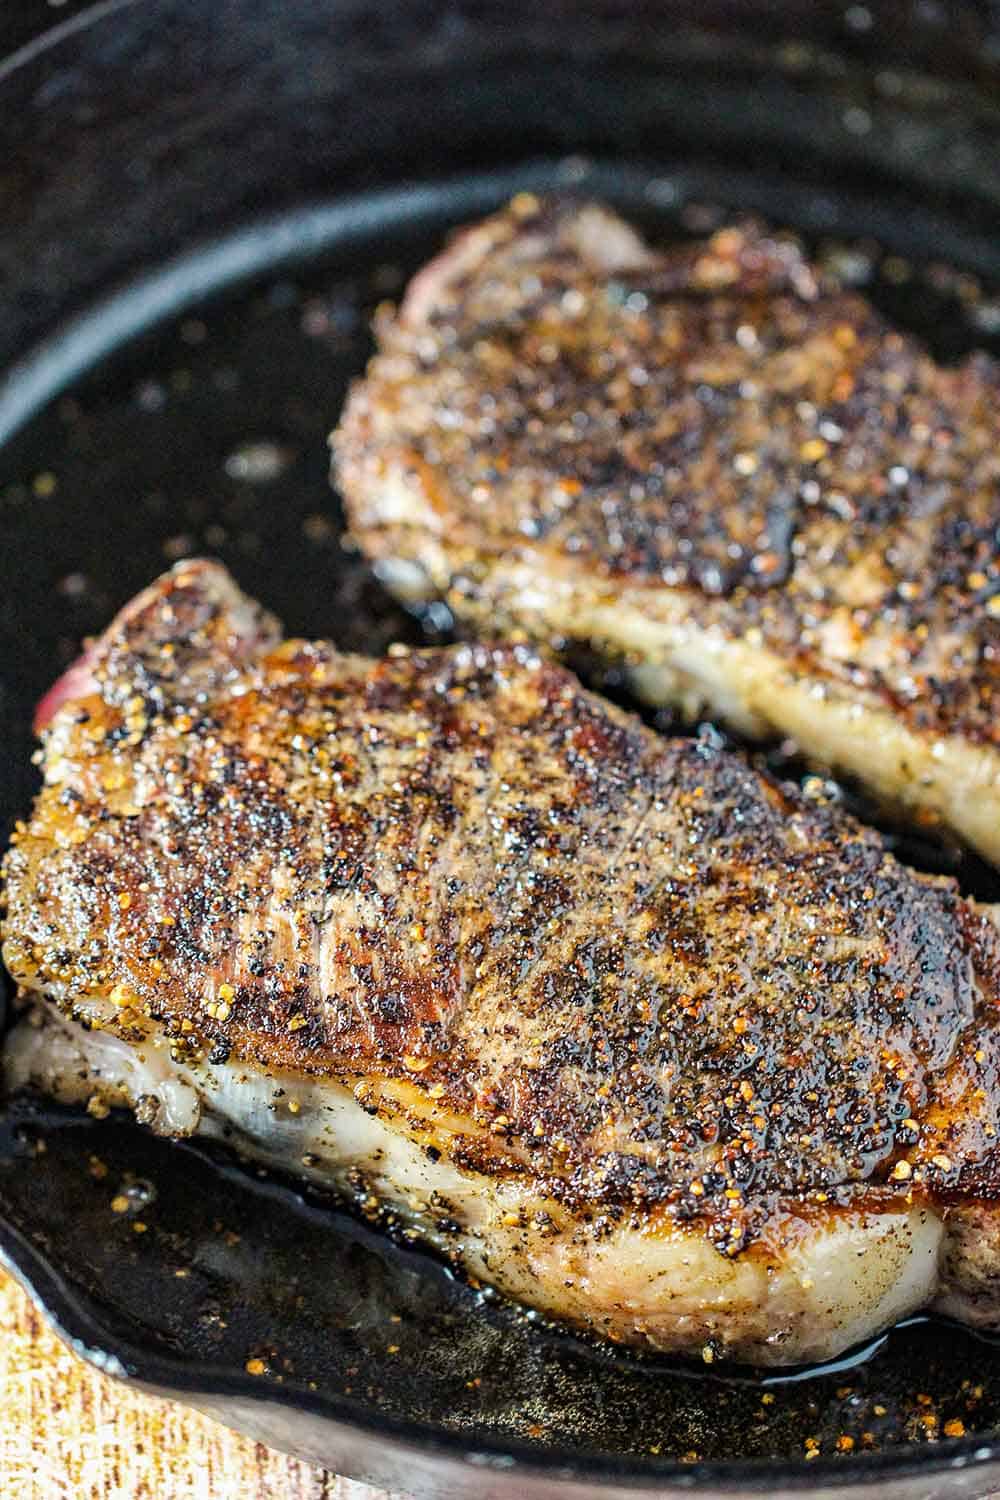 Sear the steaks in a hot cast iron skillet. 